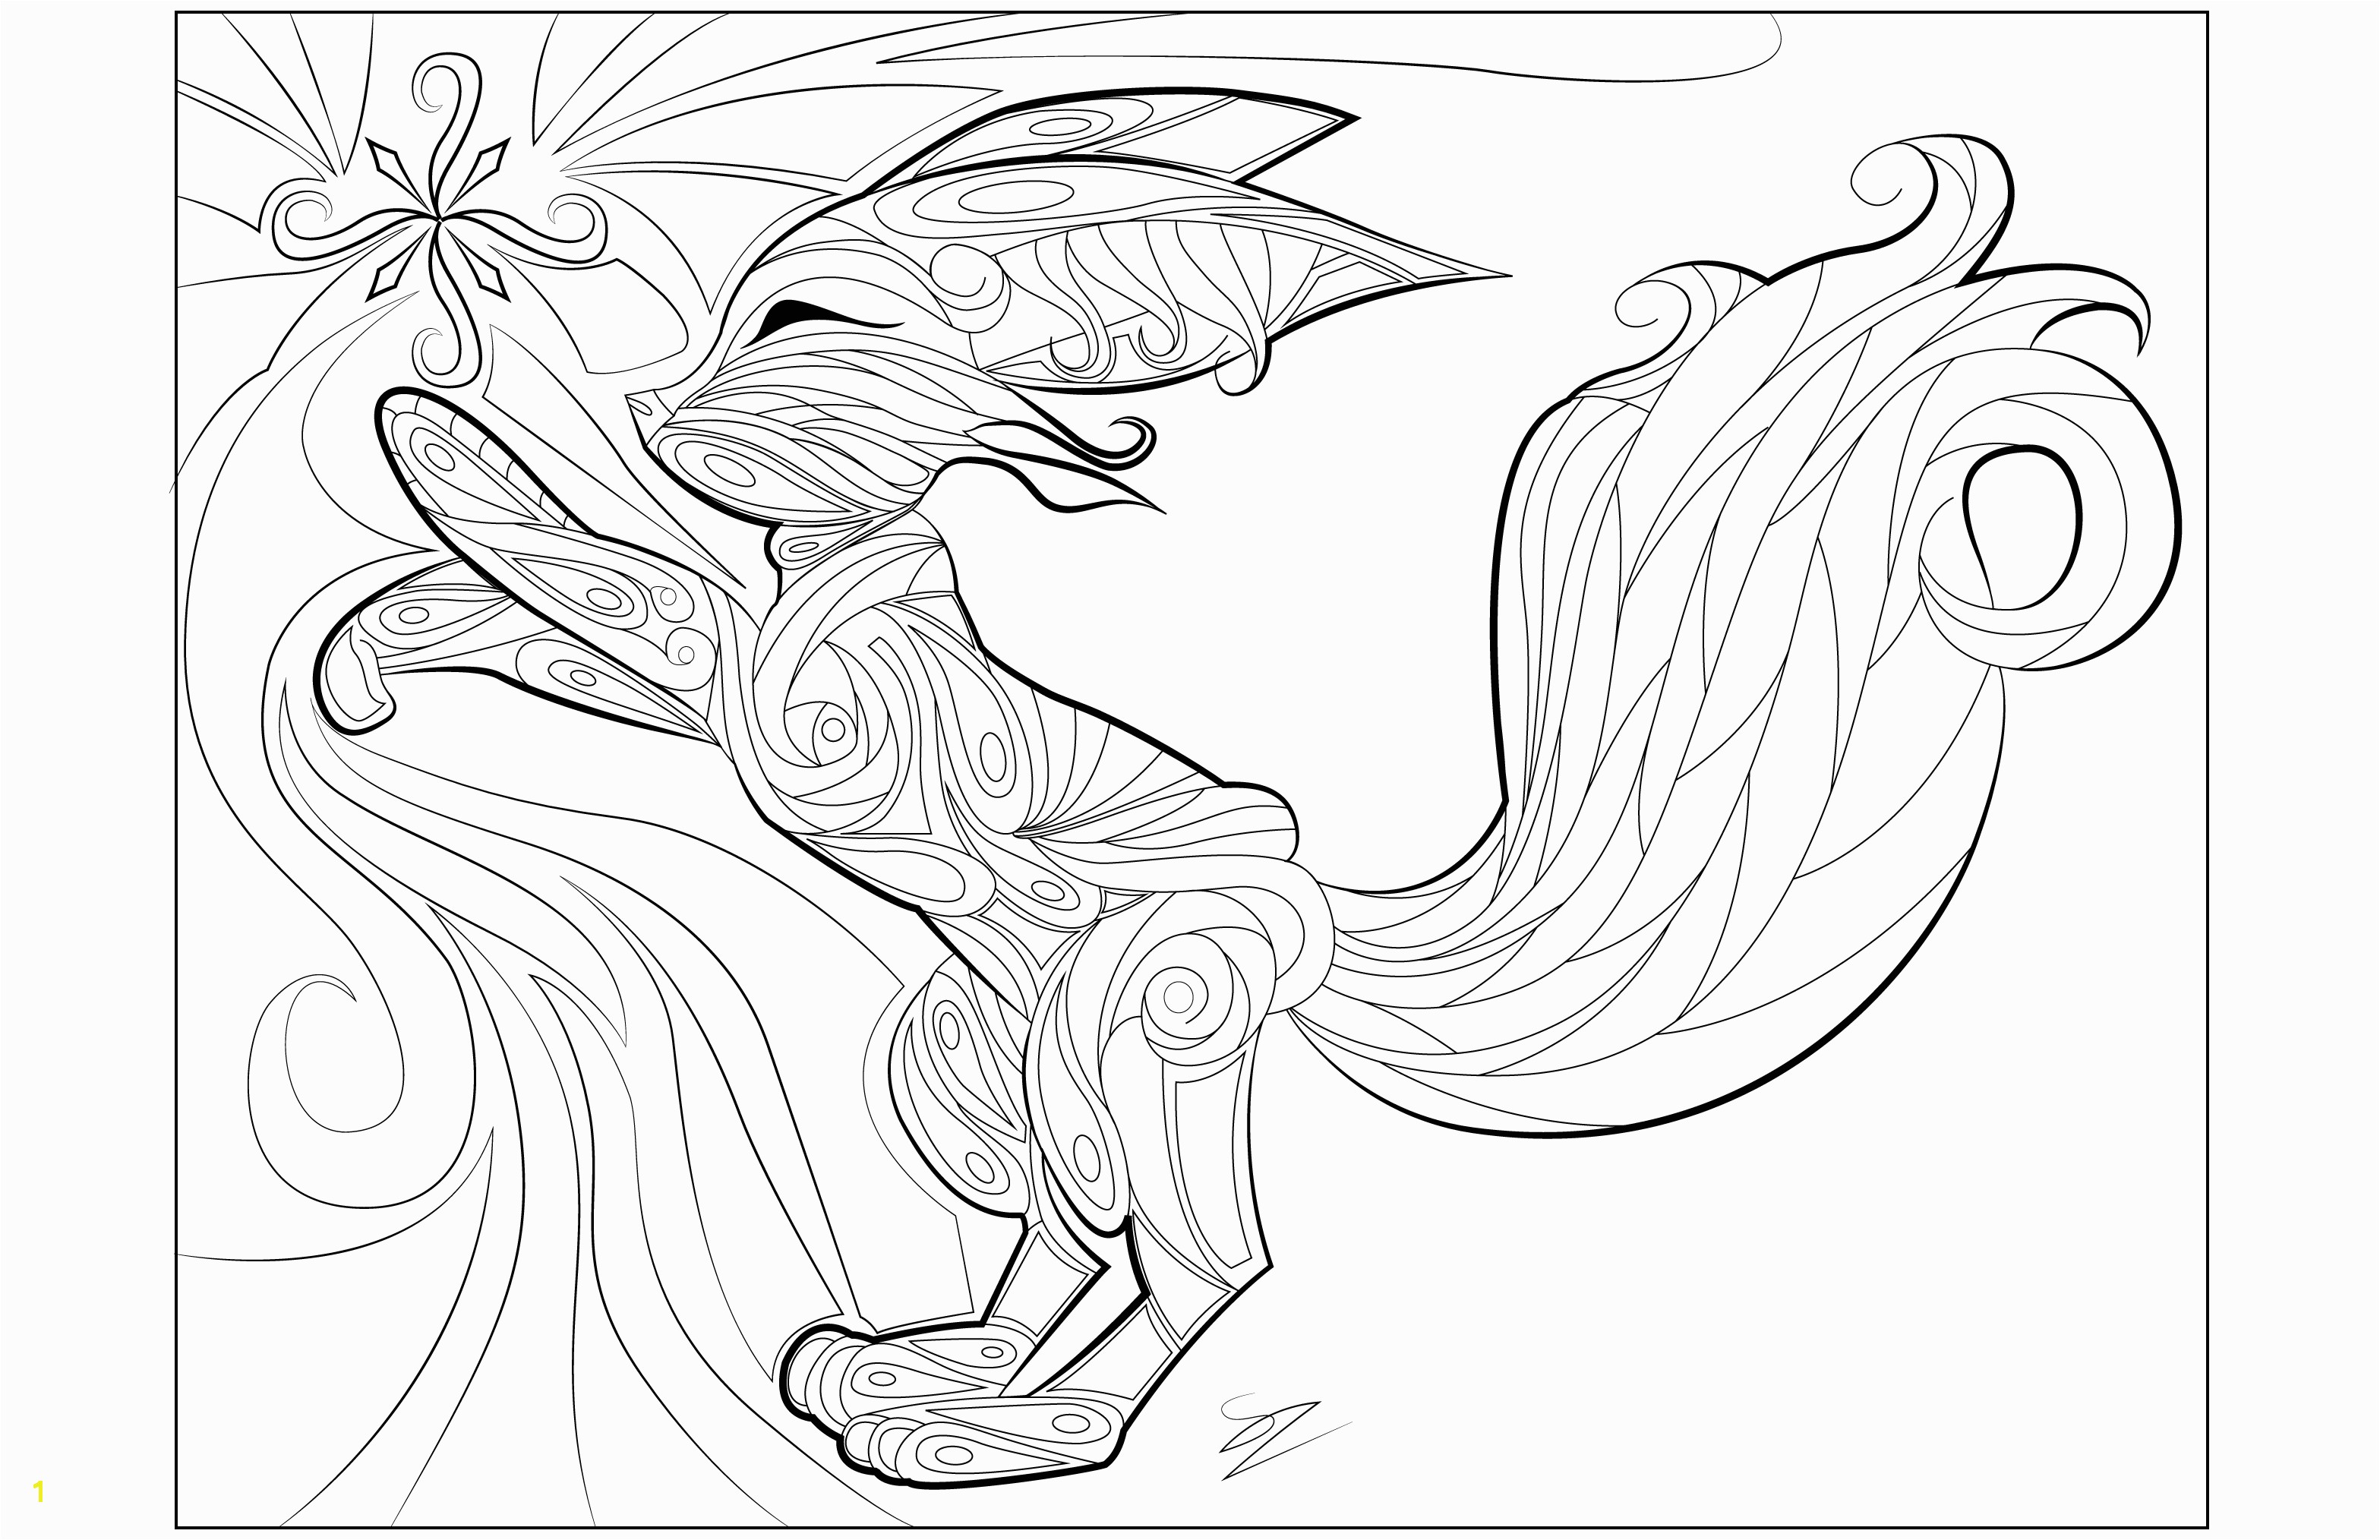 Download Fennec Fox Coloring Page | divyajanani.org